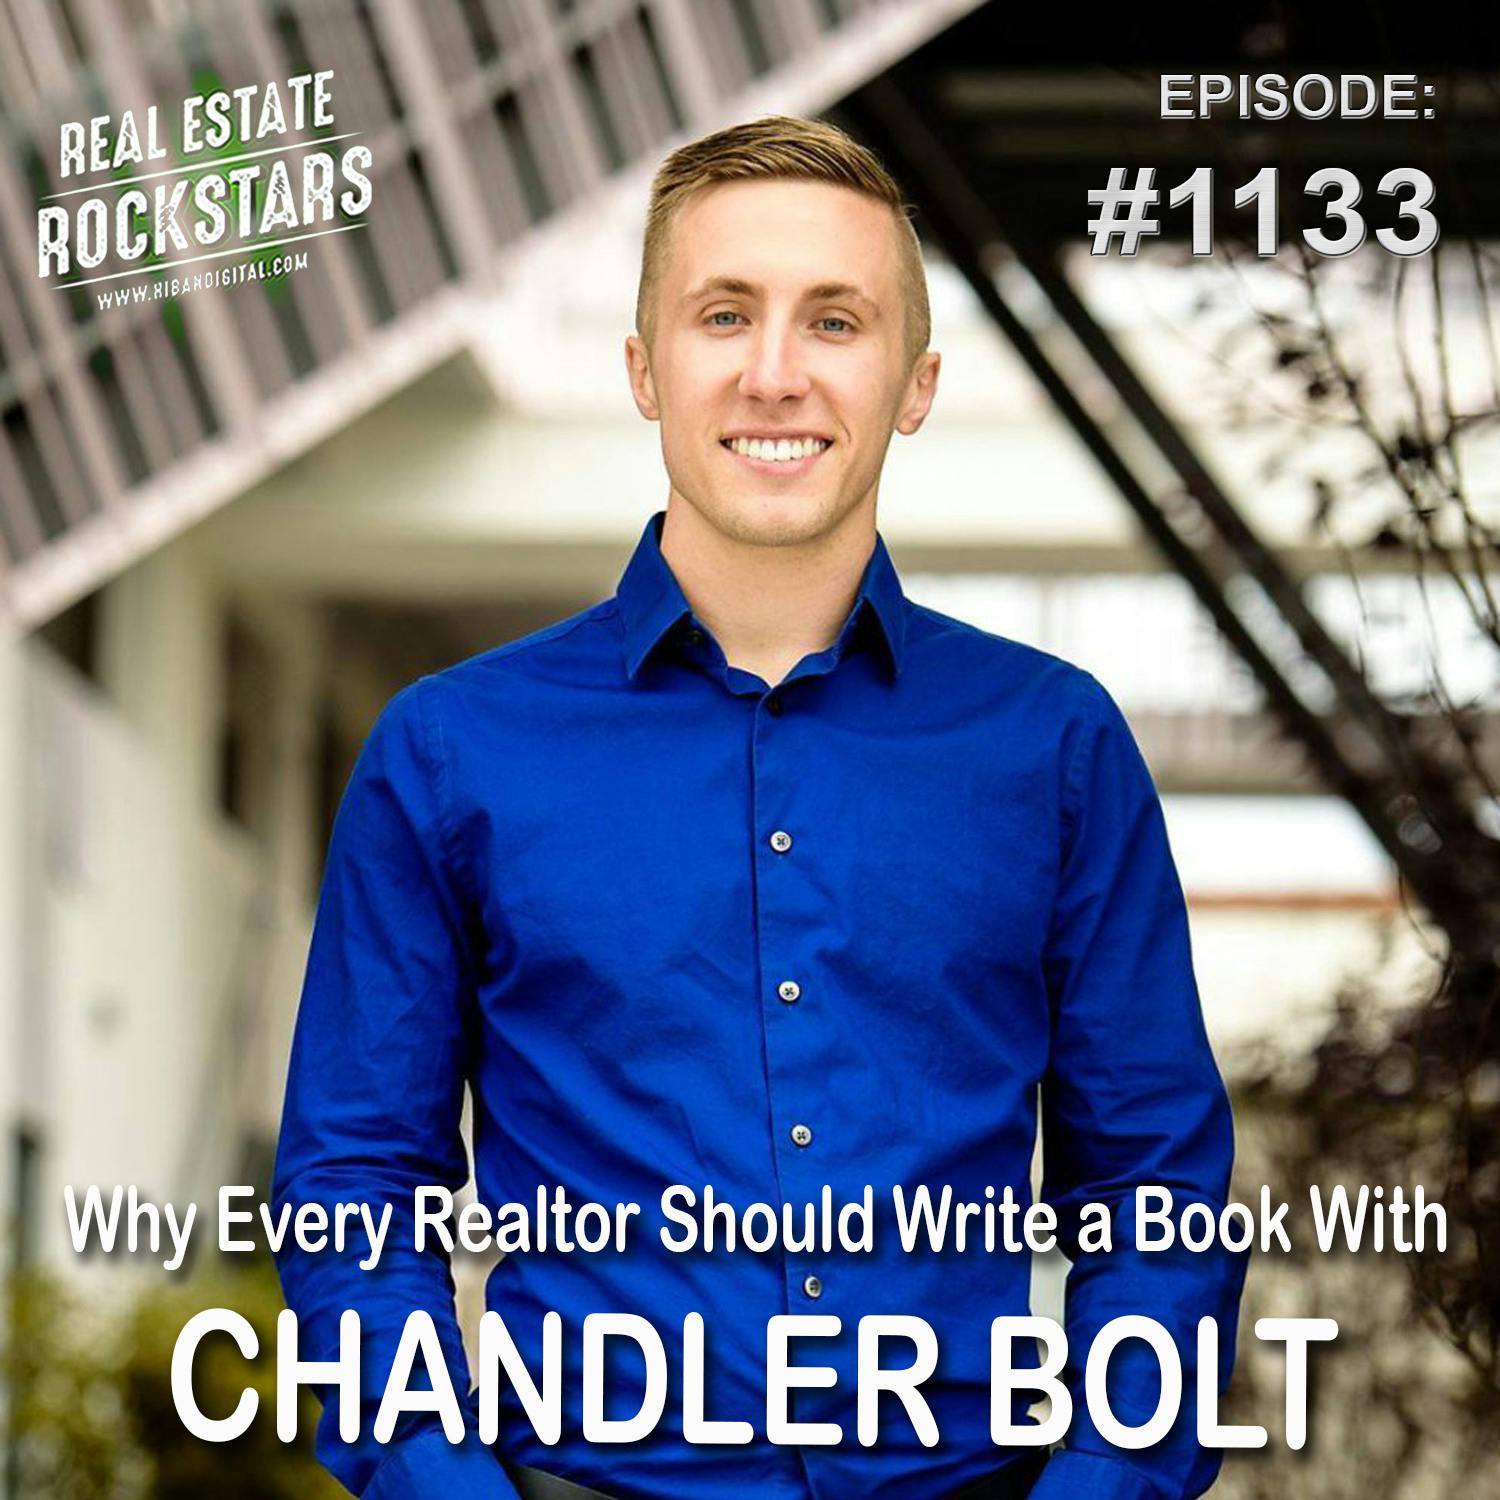 1133: Why Every Realtor Should Write a Book With Chandler Bolt